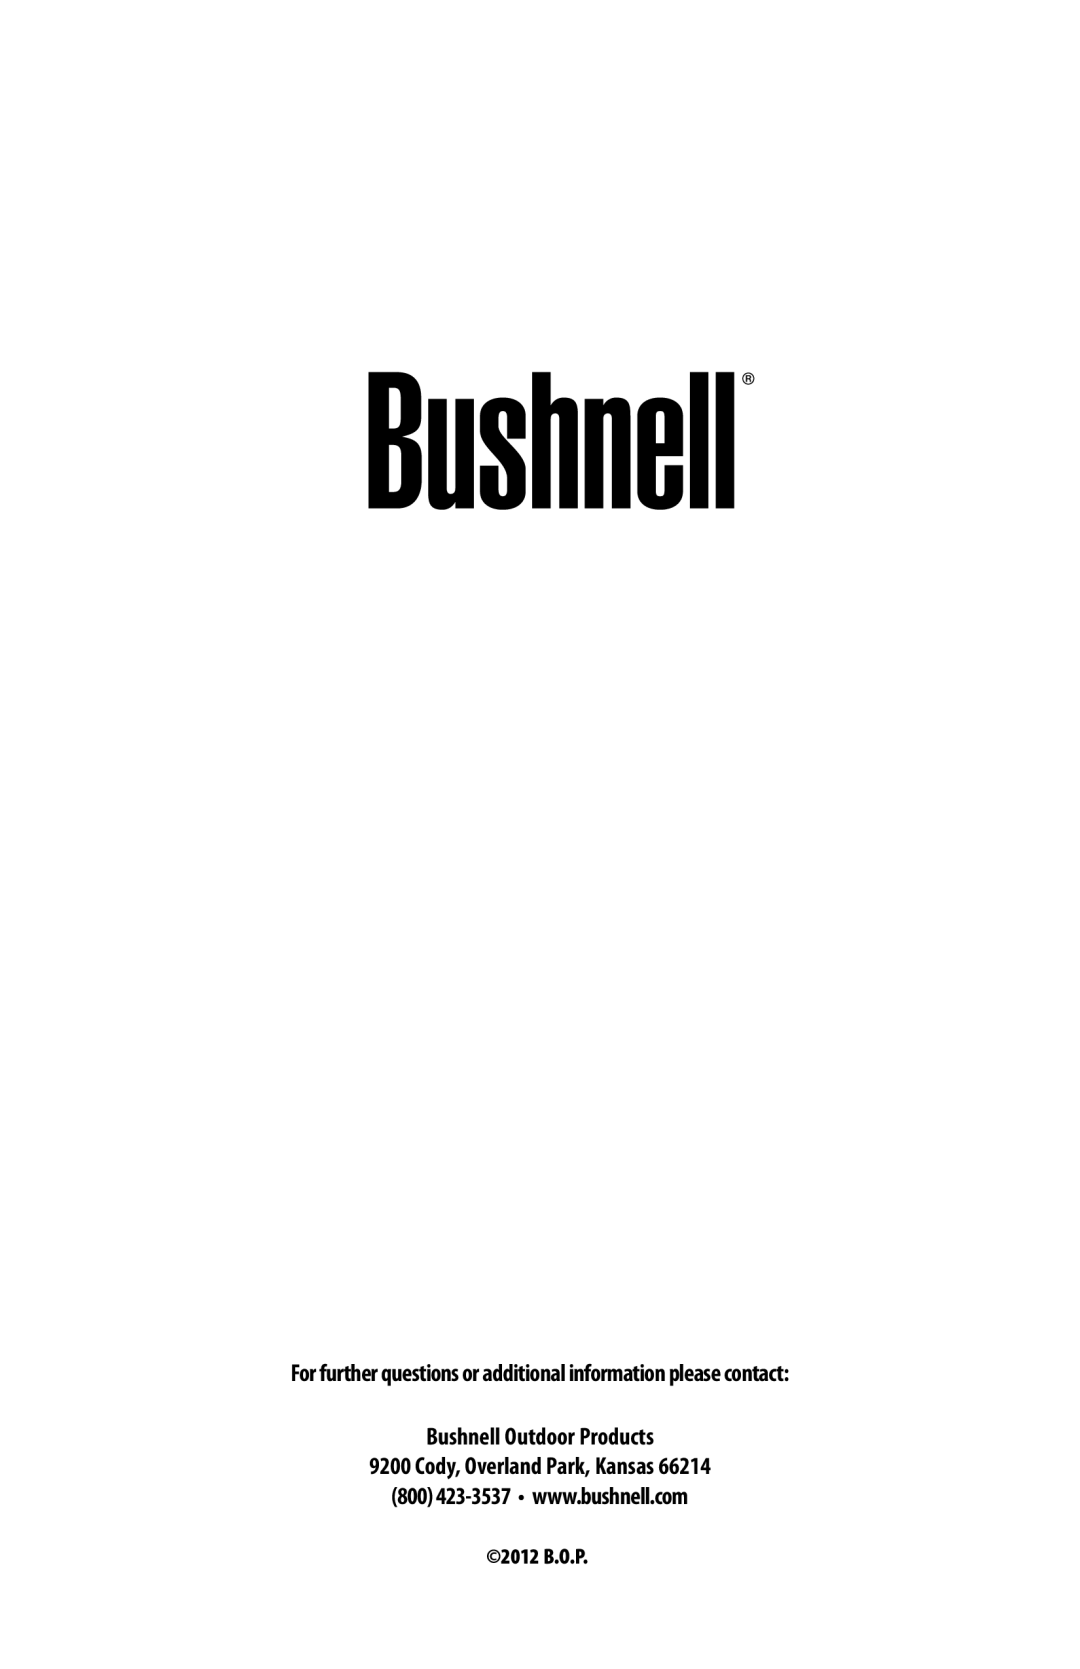 Bushnell 786050 instruction manual For further questions or additional information please contact, 2012 B.O.P 